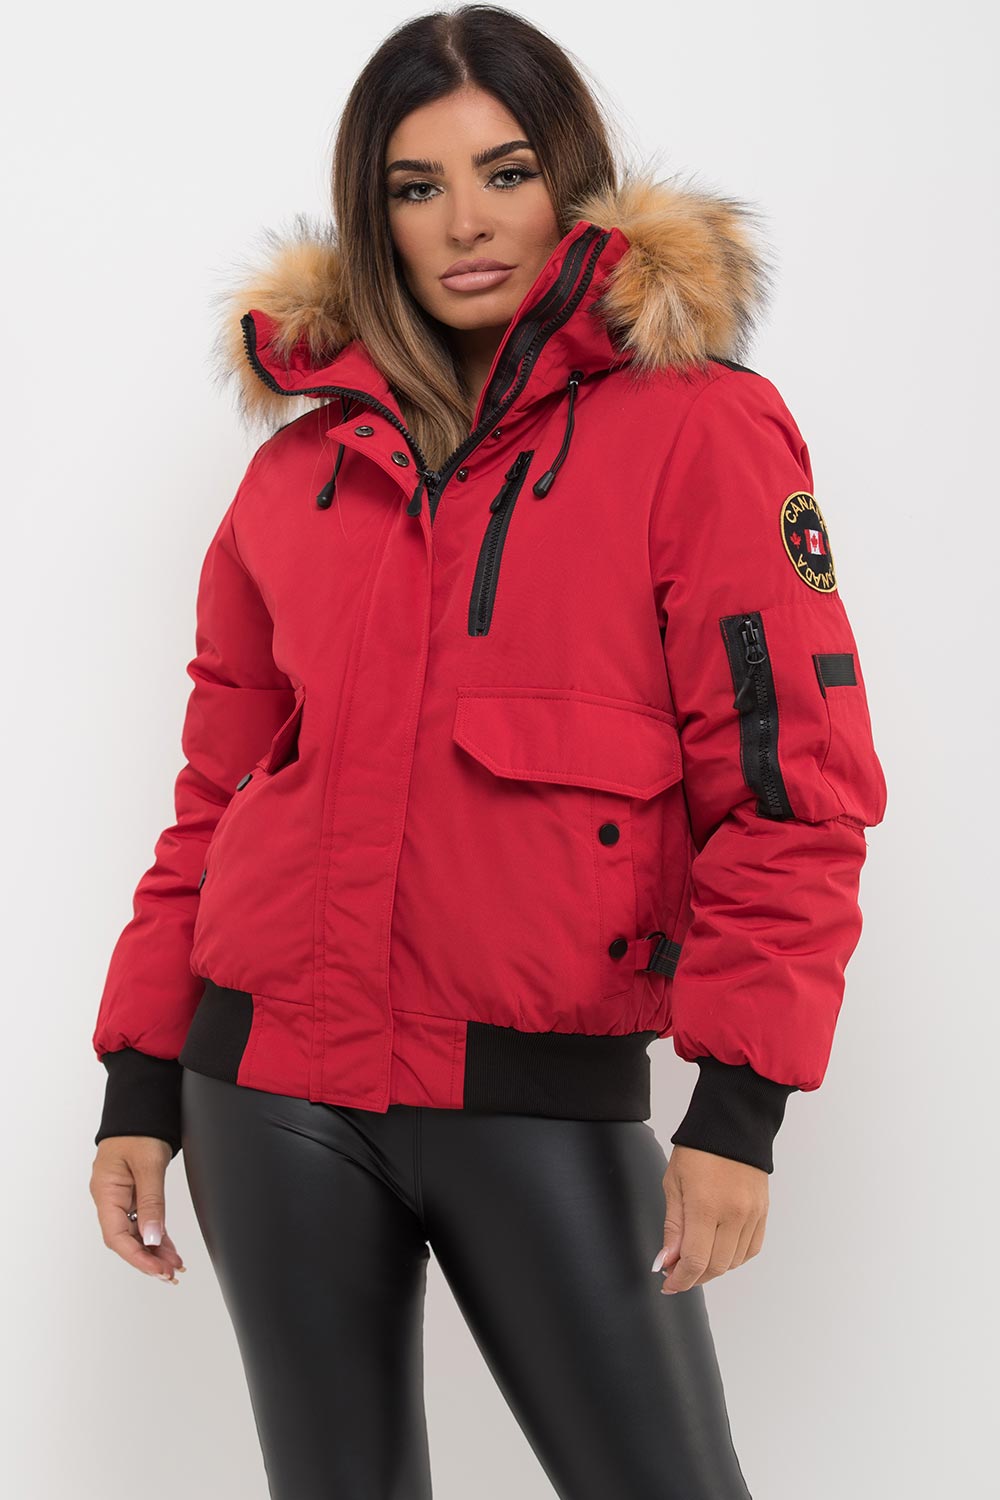 Women's Bomber Jacket With Fur Hood Red Canada Goose – Styledup.co.uk